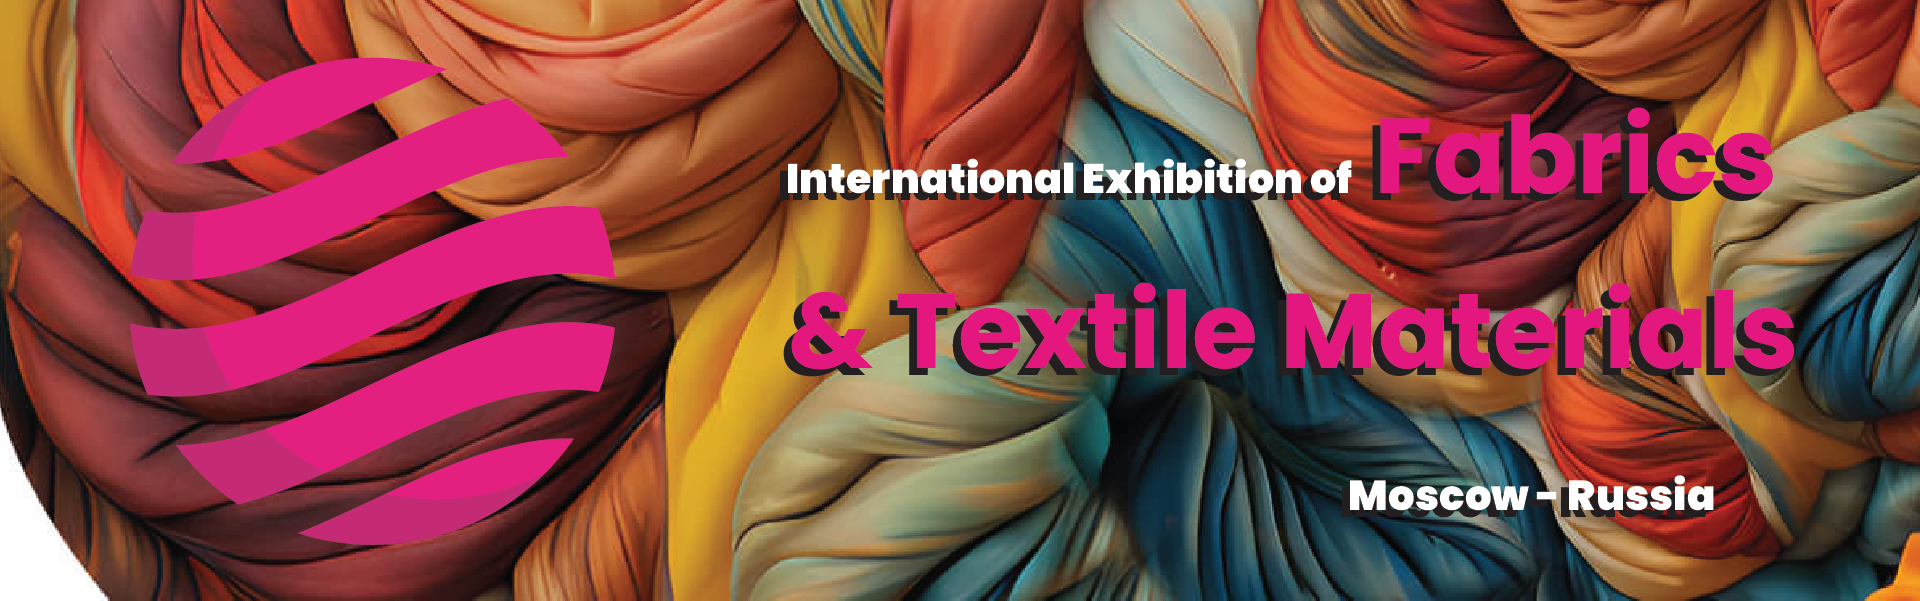 Fabrics and Textile Materials (INTERFABRIC) Exhibition Moscow Russia